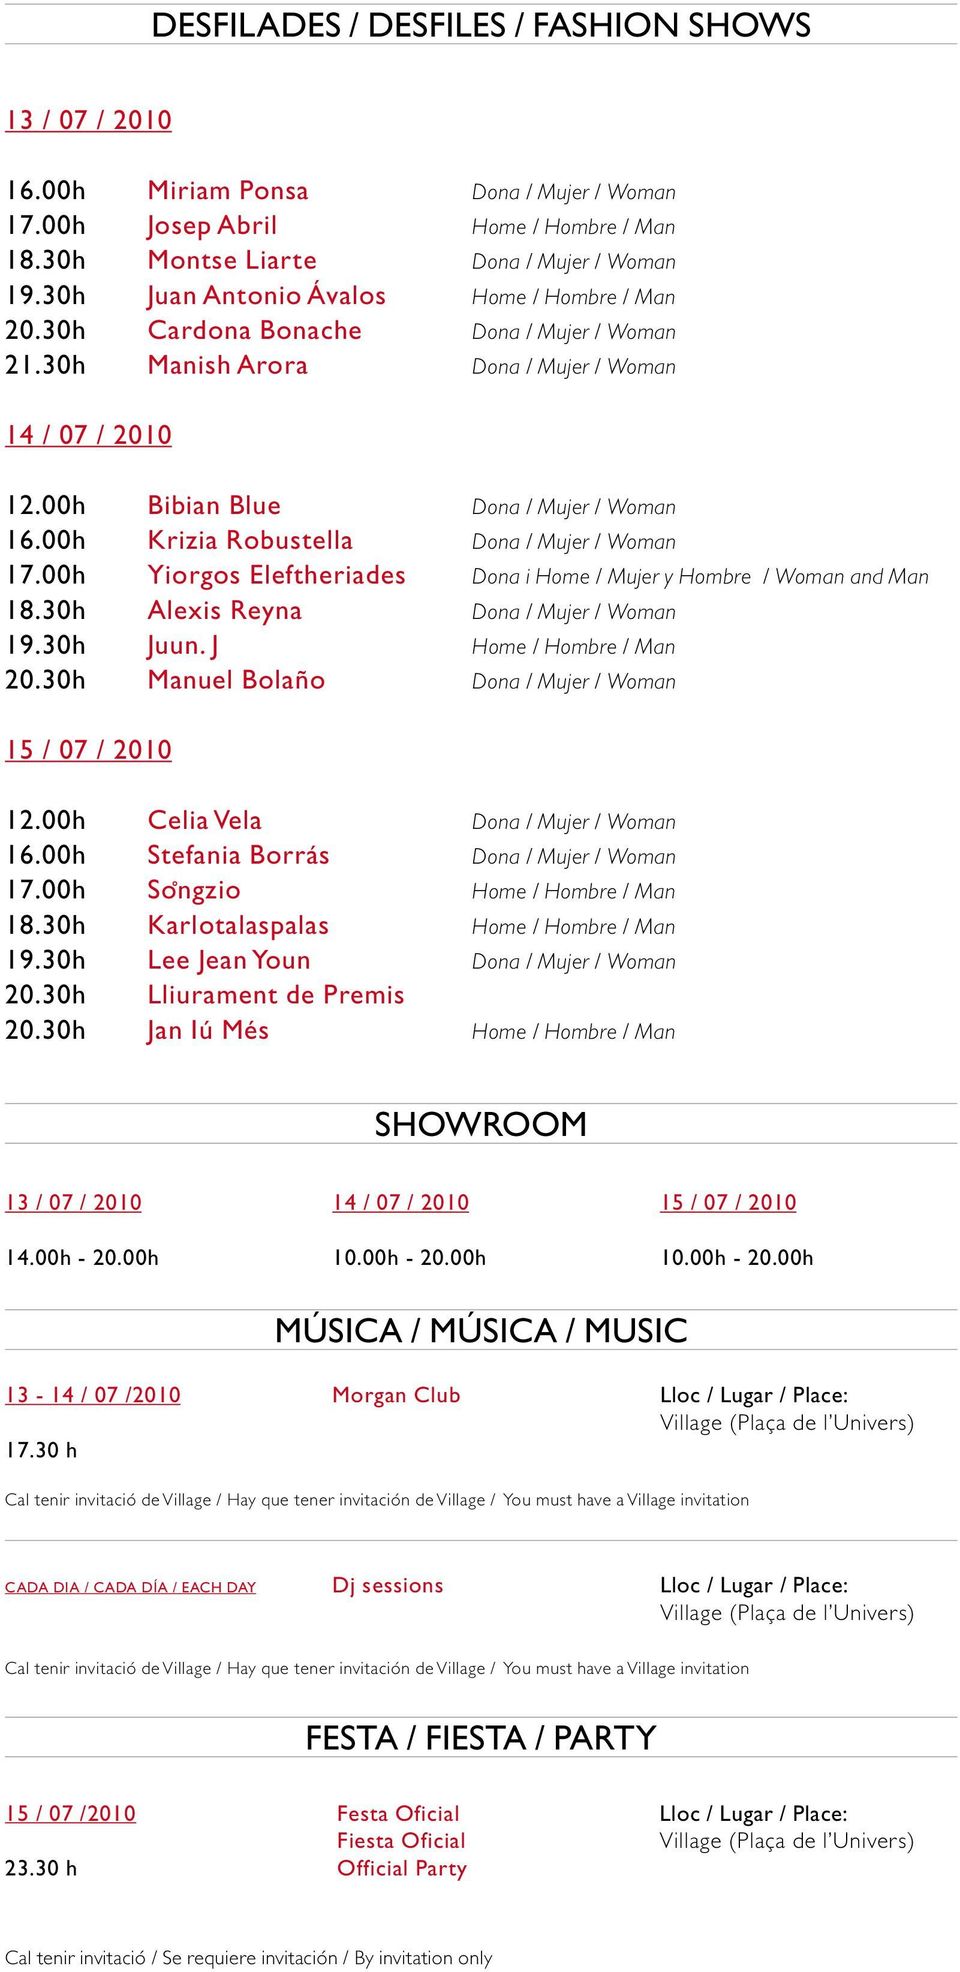 00h Krizia Robustella Dona / Mujer / Woman 17.00h Yiorgos Eleftheriades Dona i Home / Mujer y Hombre / Woman and Man 18.30h Alexis Reyna Dona / Mujer / Woman 19.30h Juun. J Home / Hombre / Man 20.